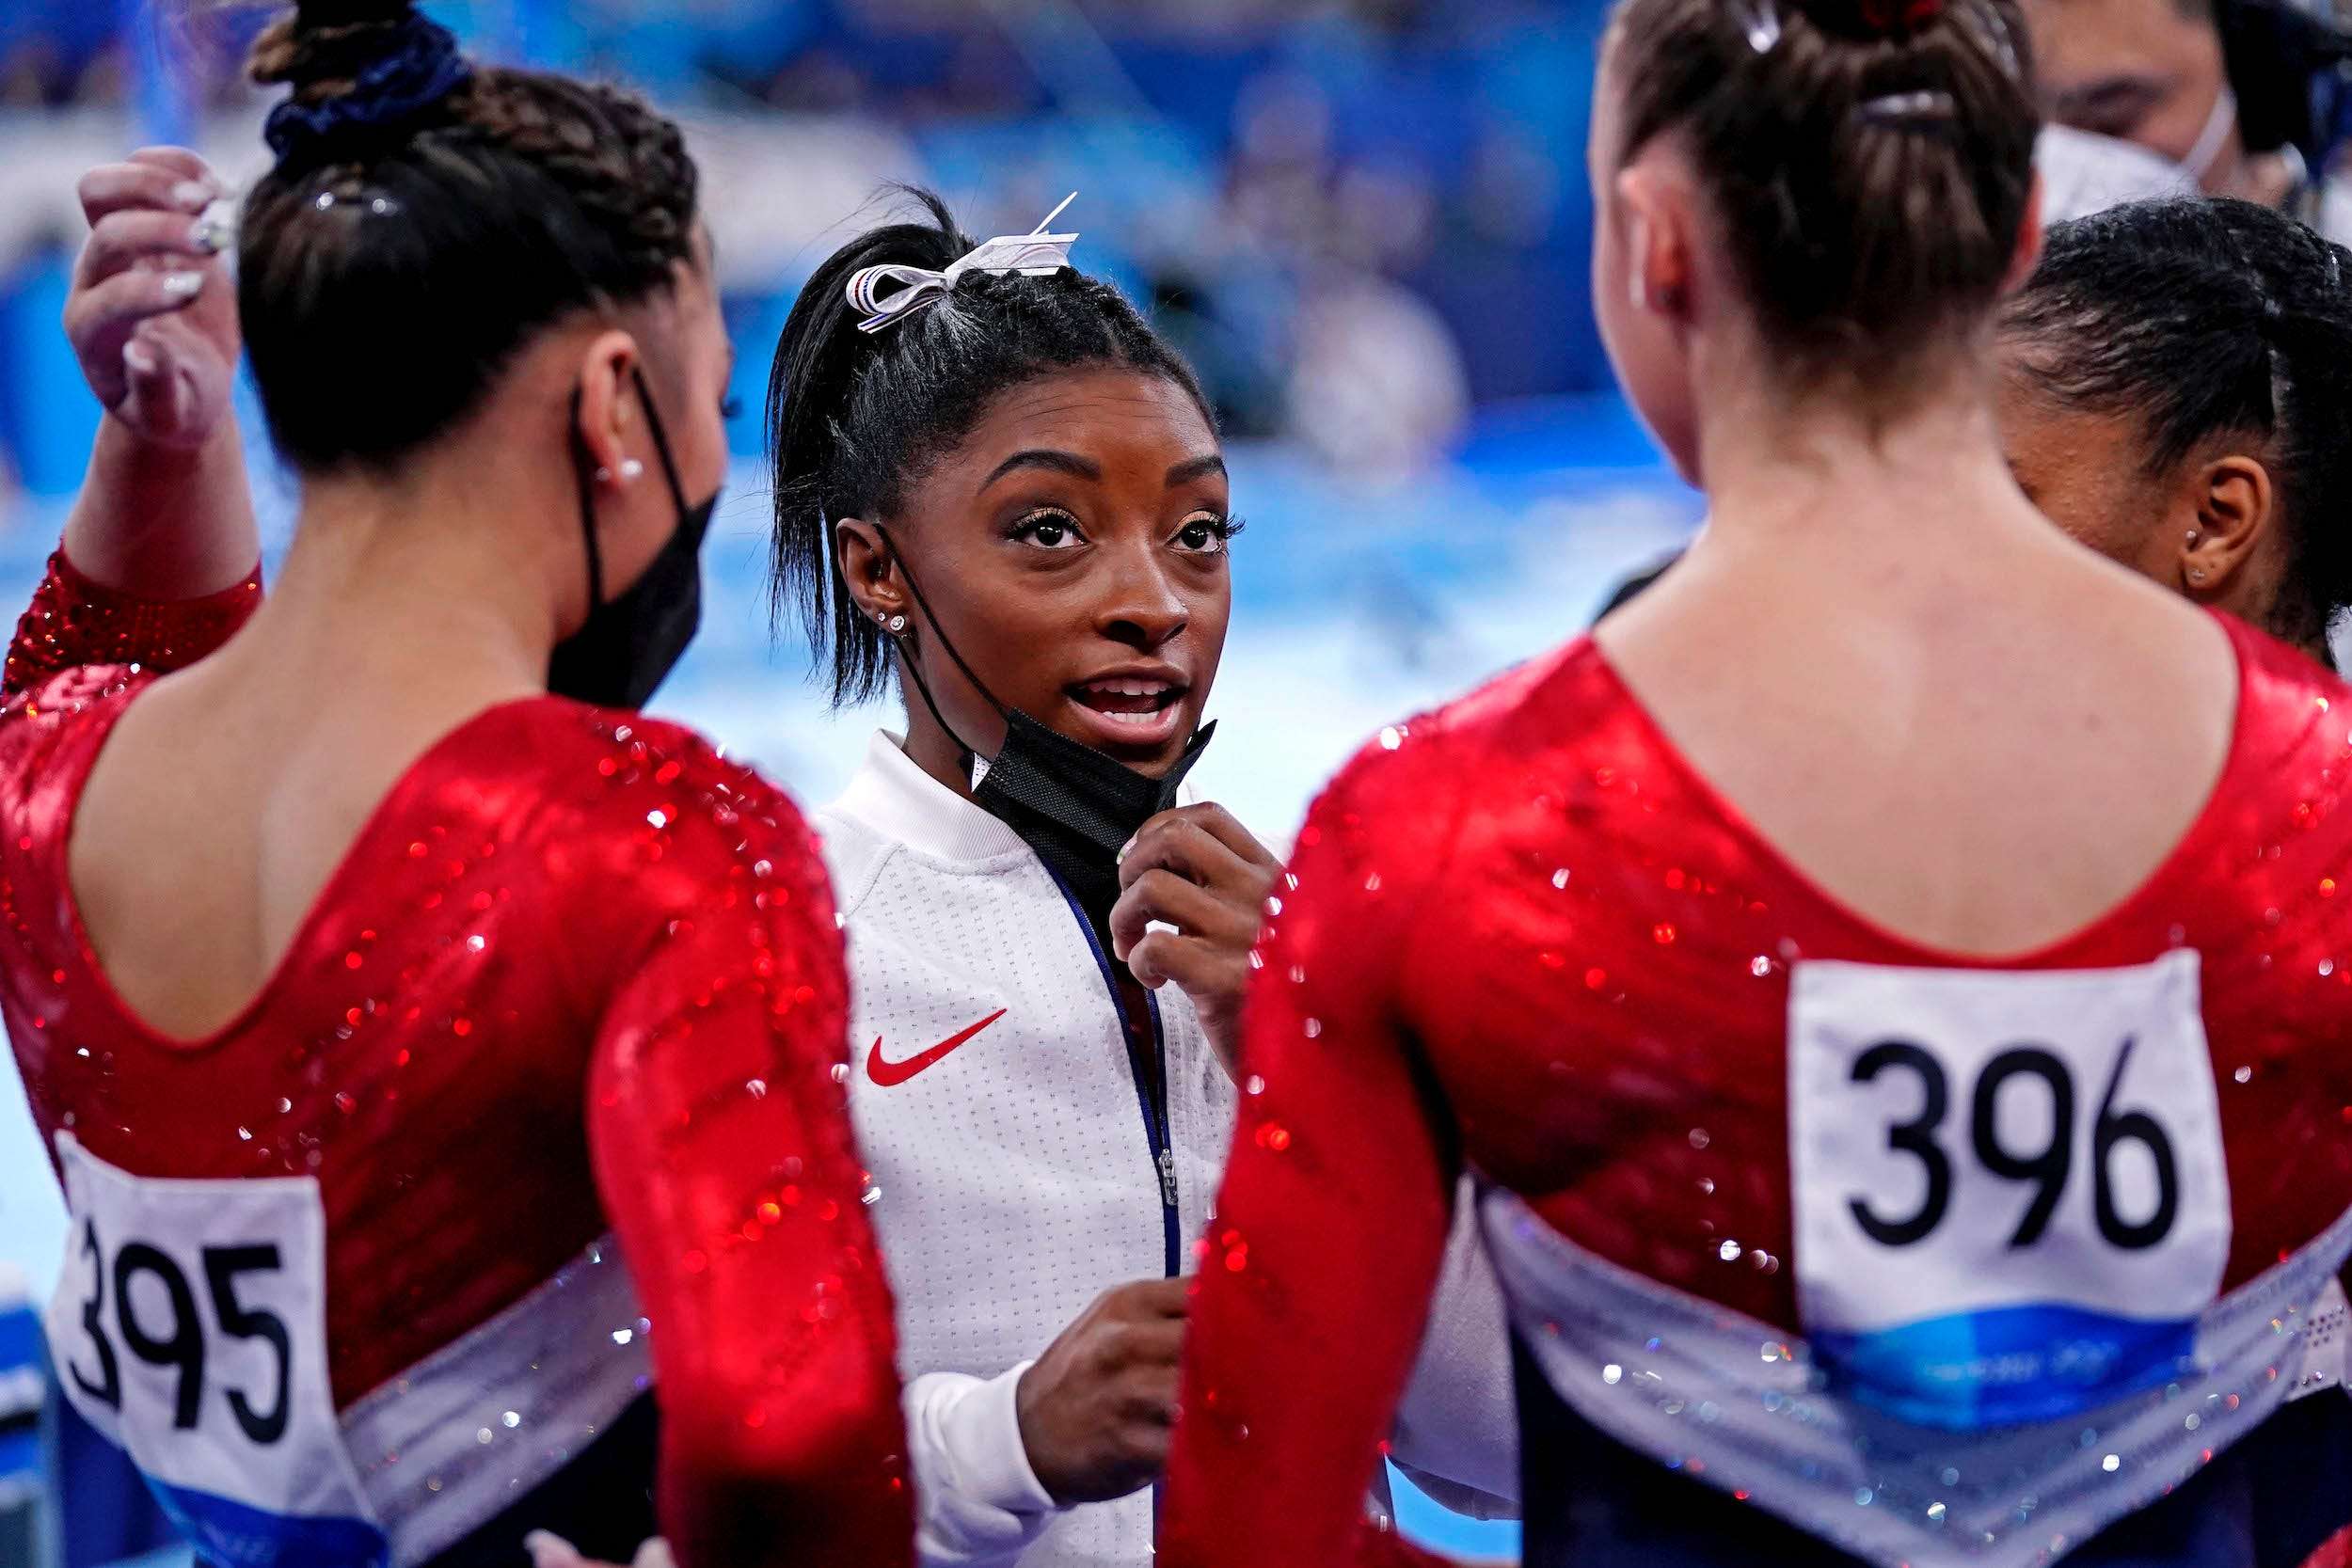 Simone Biles coached and cheered on her Team USA teammates after